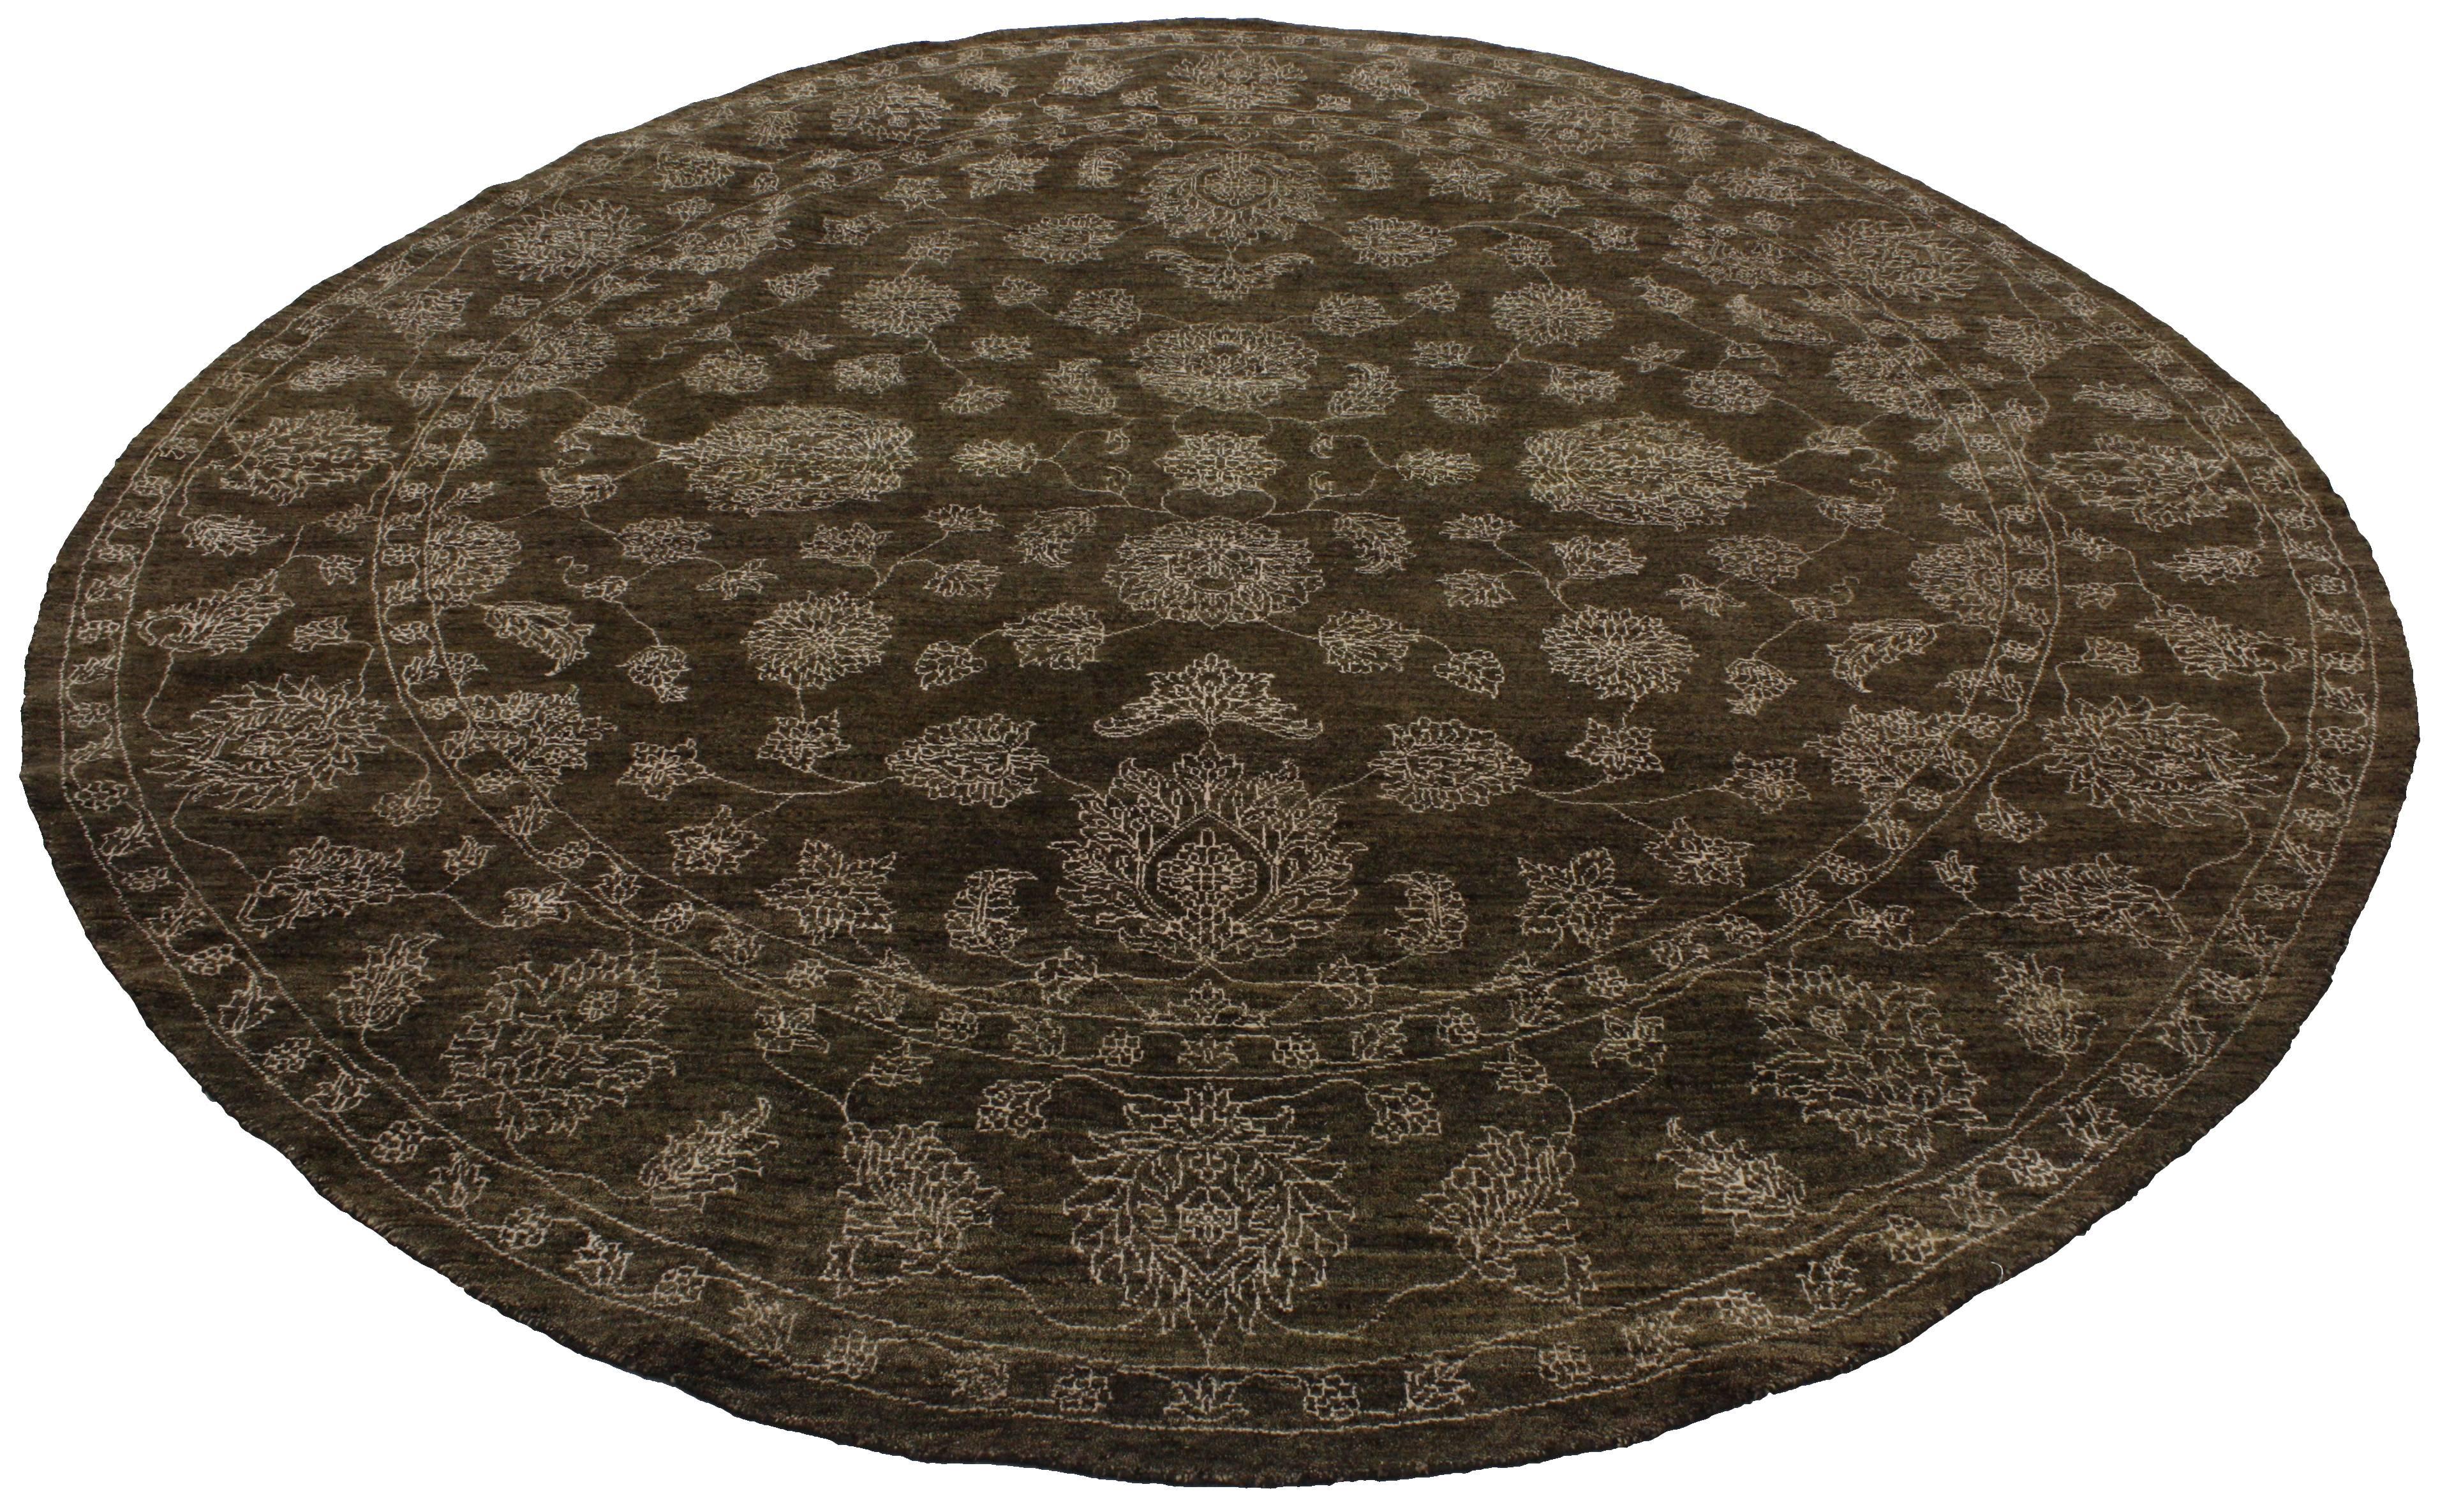 Timeless and refined, this round brown Oushak rug features modern traditional style. Sporting a simple yet refined and polished all-over geometric floral design, this round Oushak rug effortlessly blends well with modern or contemporary-styled